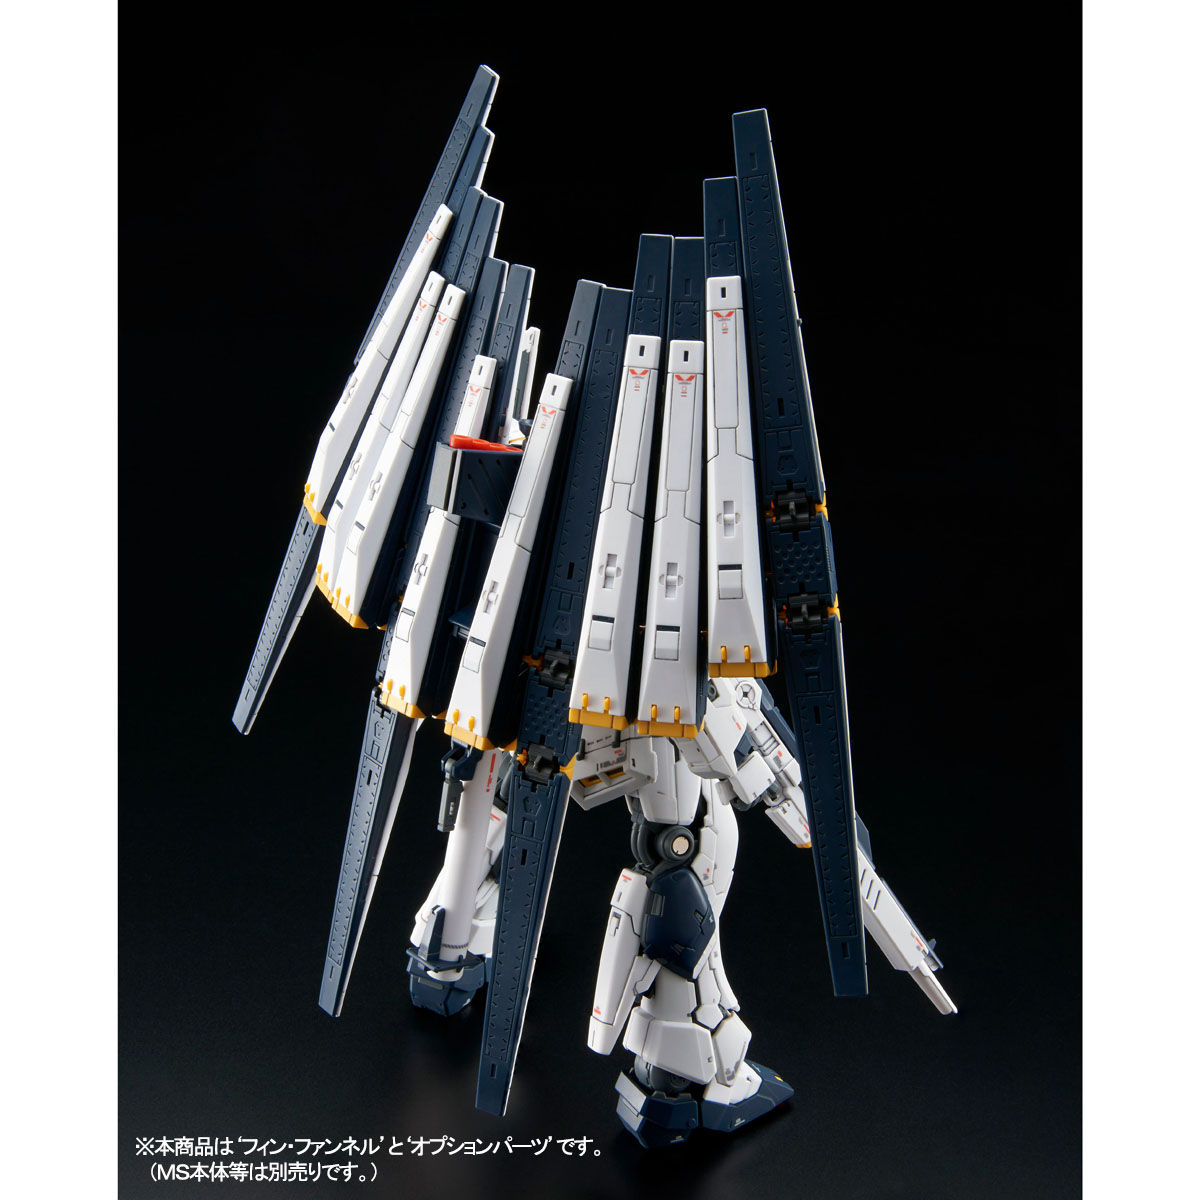 RG 1/144 Expansion Parts For RX-93 ν Gundam Double Fin Funnel Custom Unit